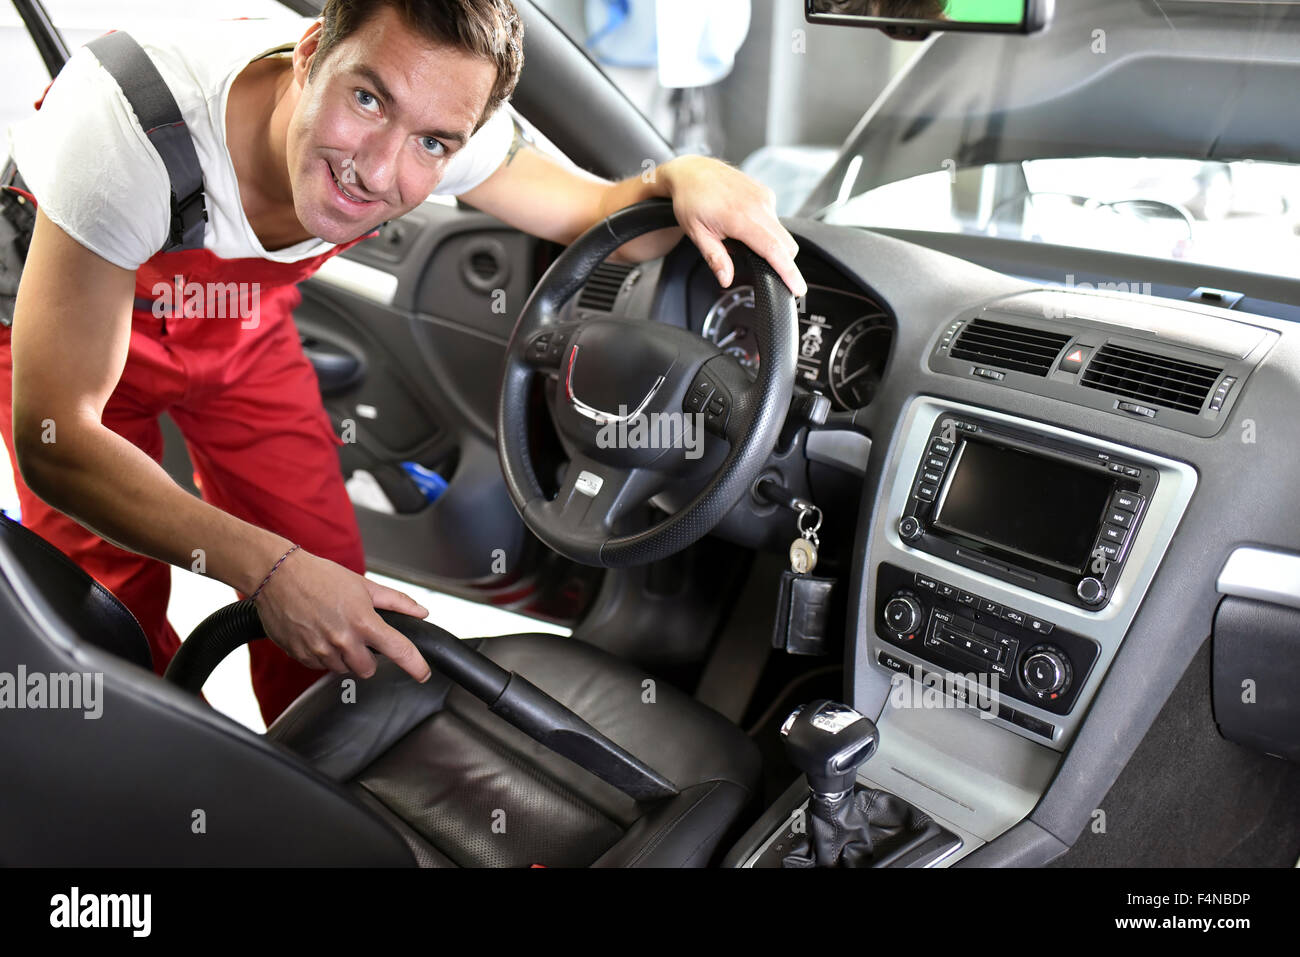 Car cleaning, man hoovering car interior Stock Photo